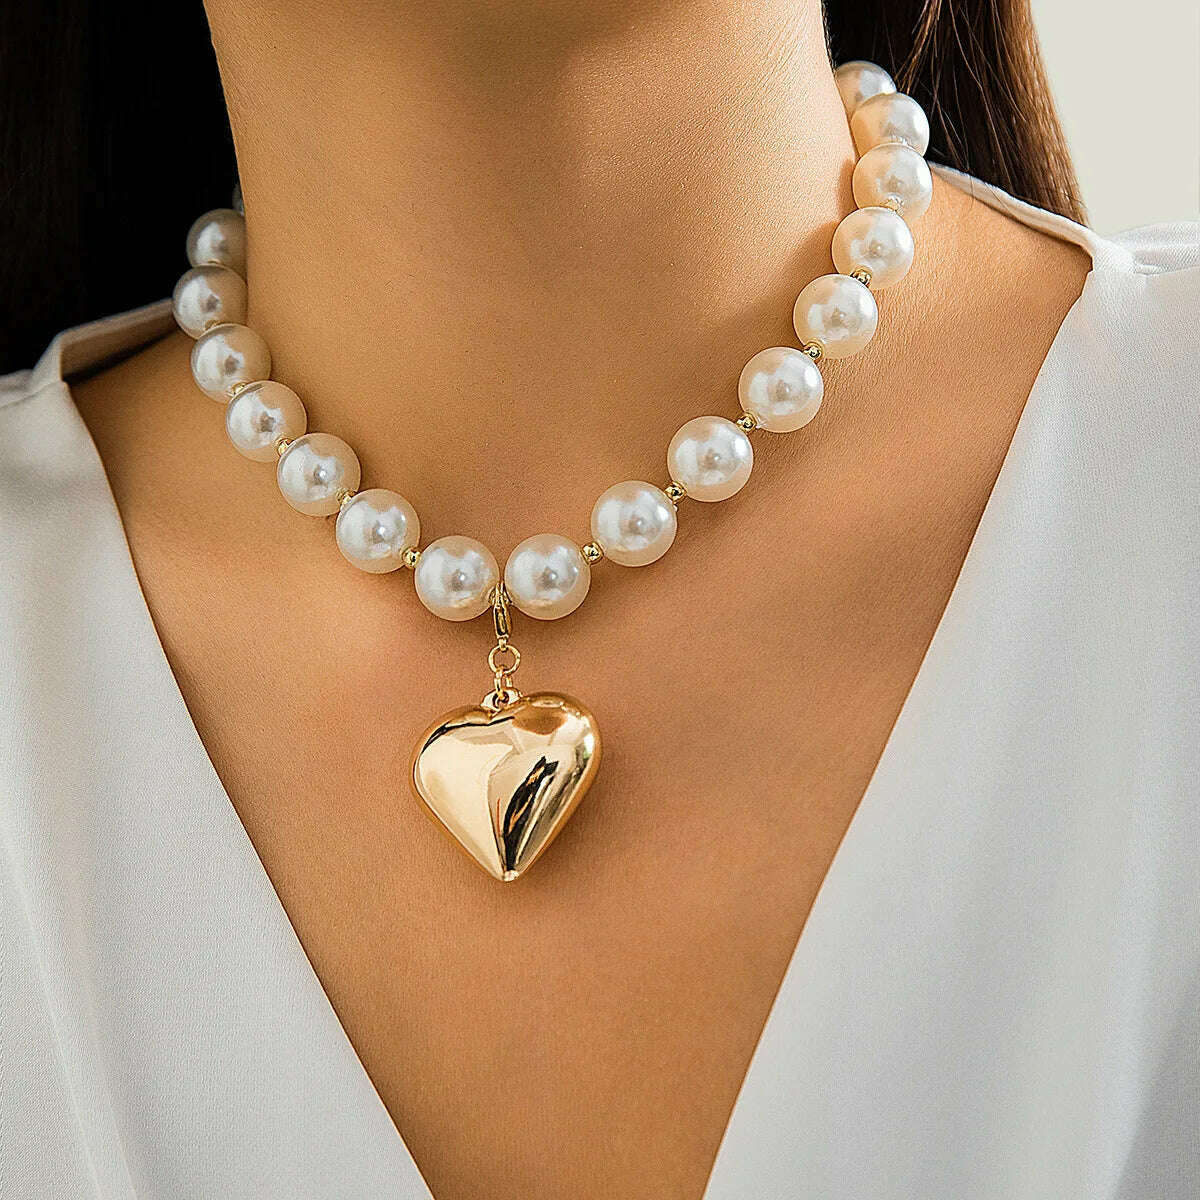 KIMLUD, DIEZI Exaggerated CCB Heart Pendant Necklace Women Party Vintage Punk Fashion Pearl Beads Choker Statement Collar Neck Jewelry, gold 6215, KIMLUD Women's Clothes